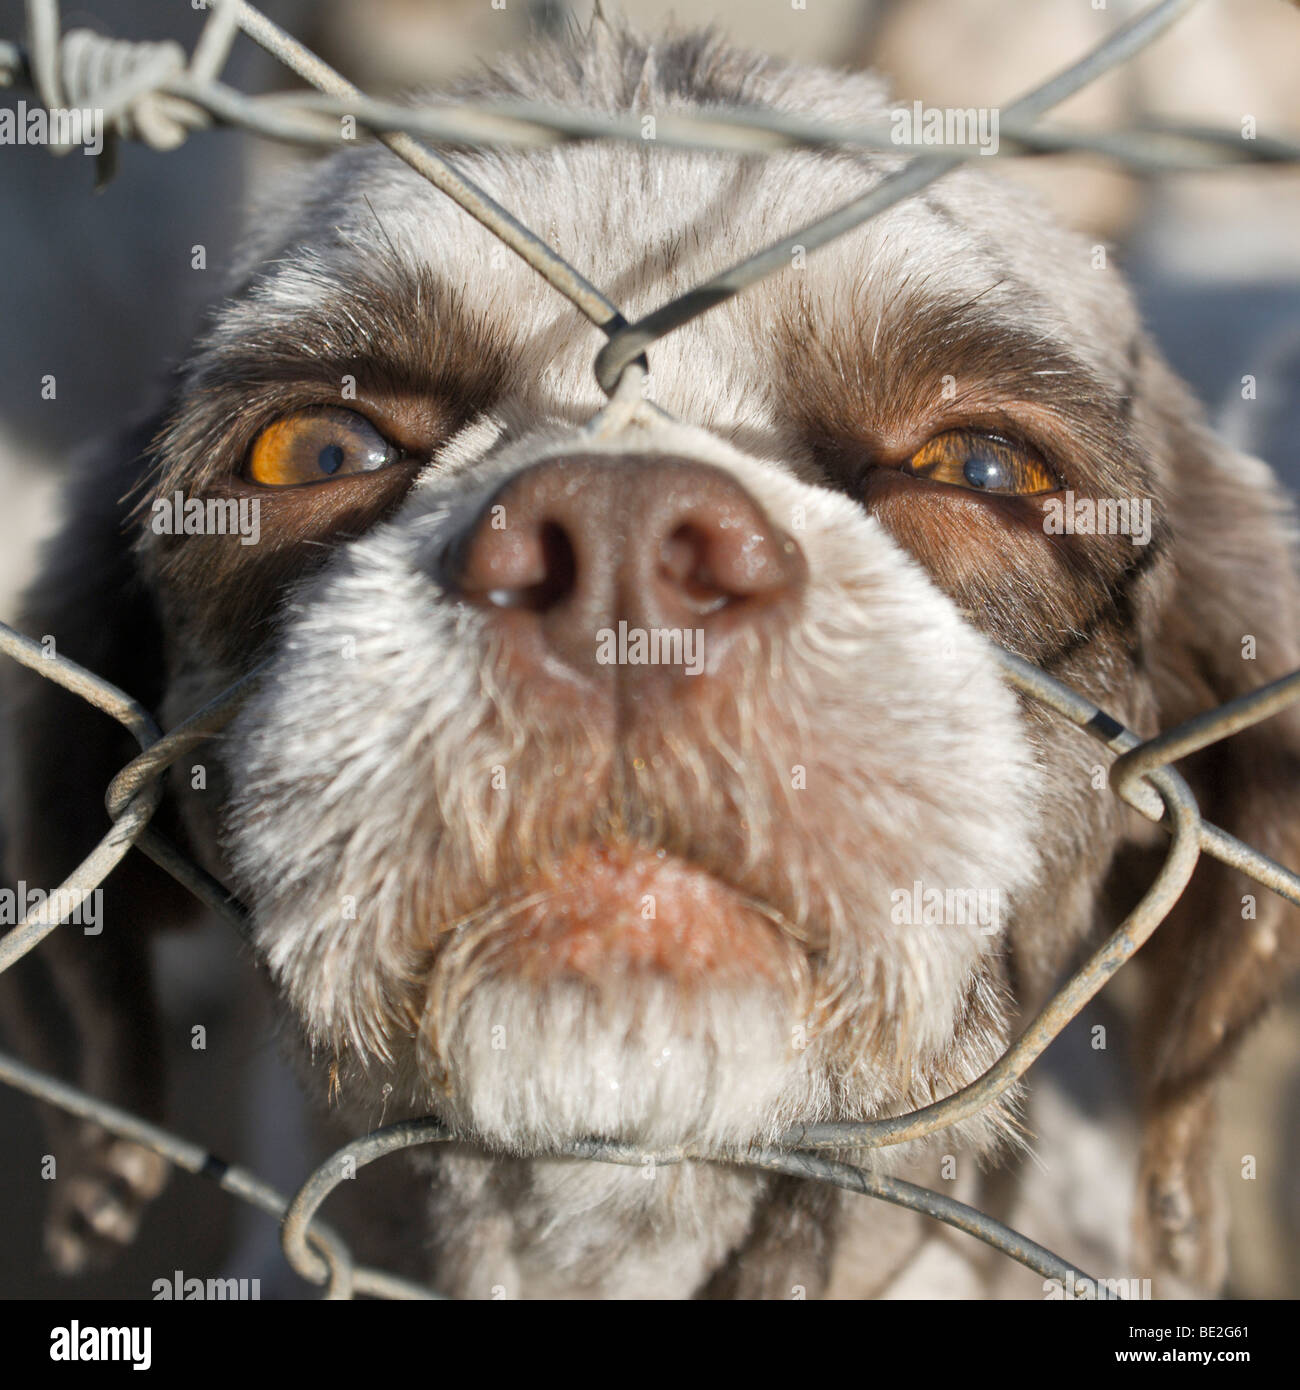 Caged puppy Stock Photo